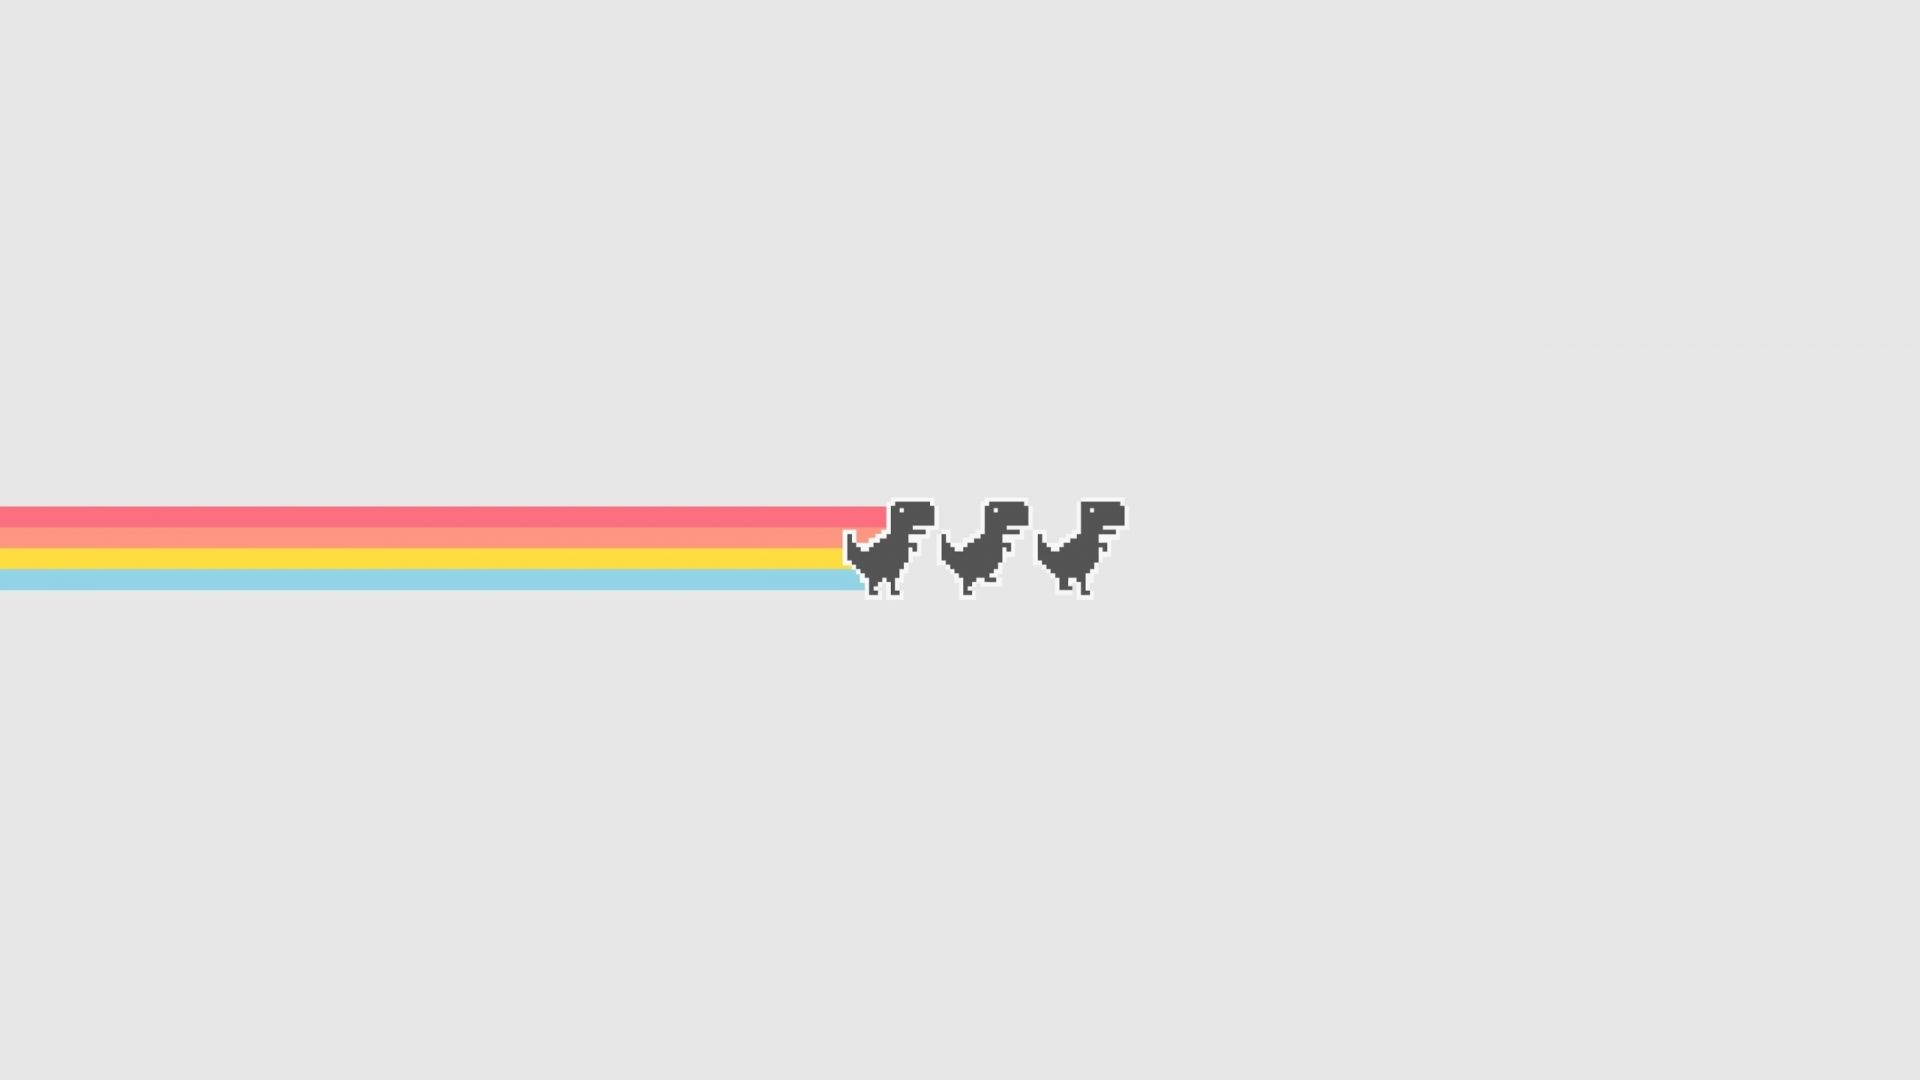 Game, trex, the run, minimal wallpaper, HD image, picture, background, d38805